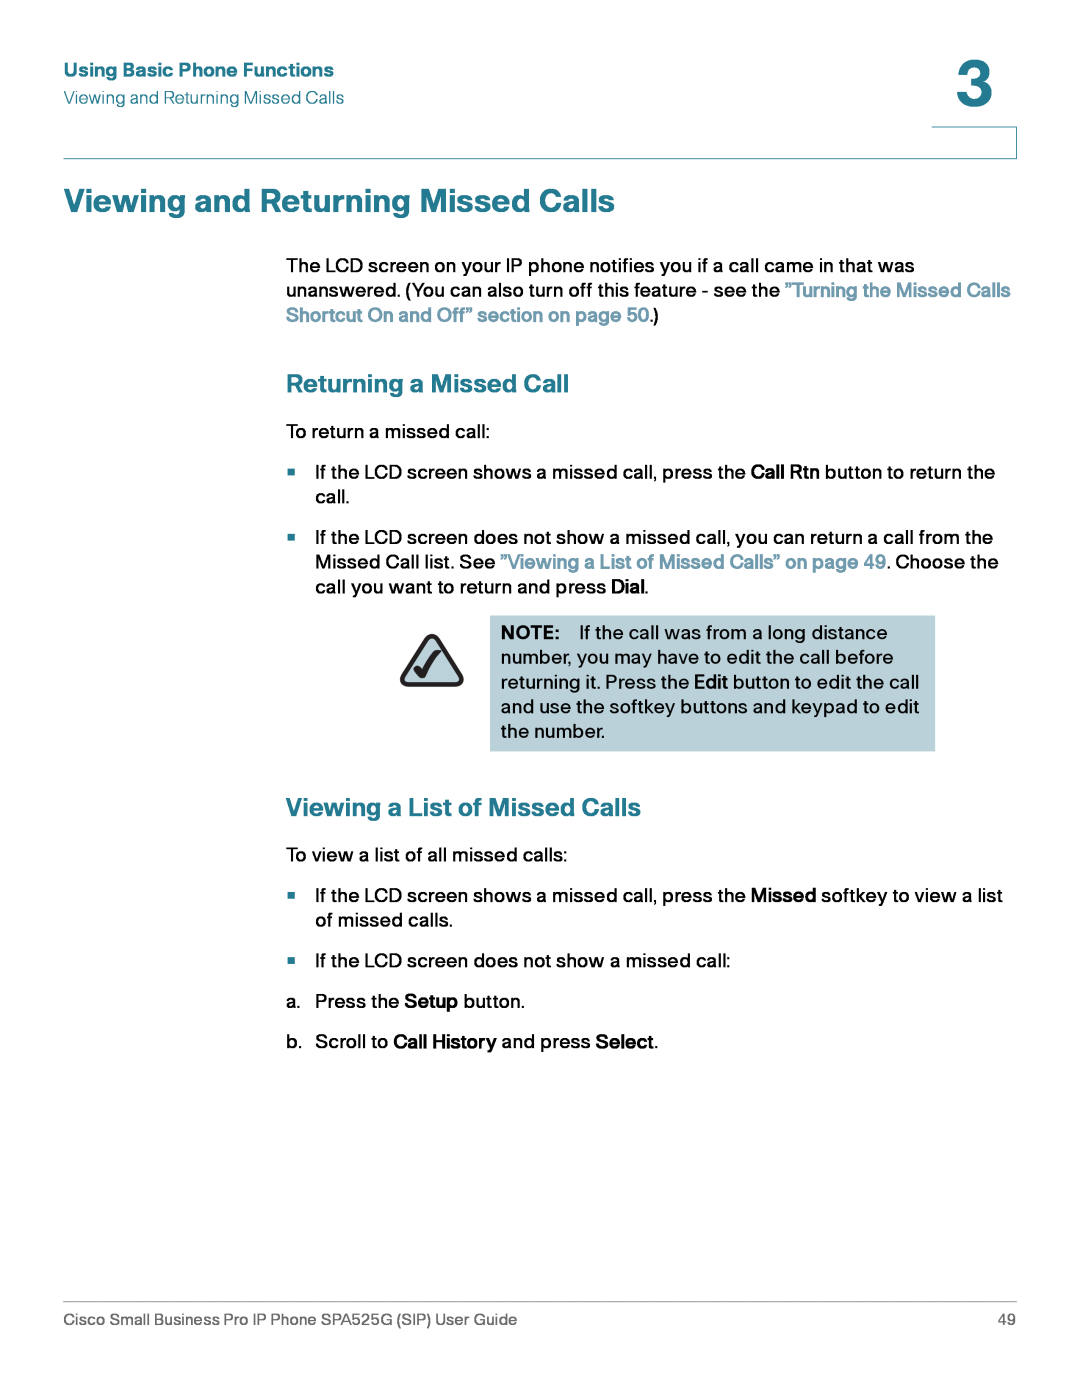 Cisco Systems SPA525G manual Viewing and Returning Missed Calls, Returning a Missed Call, Viewing a List of Missed Calls 